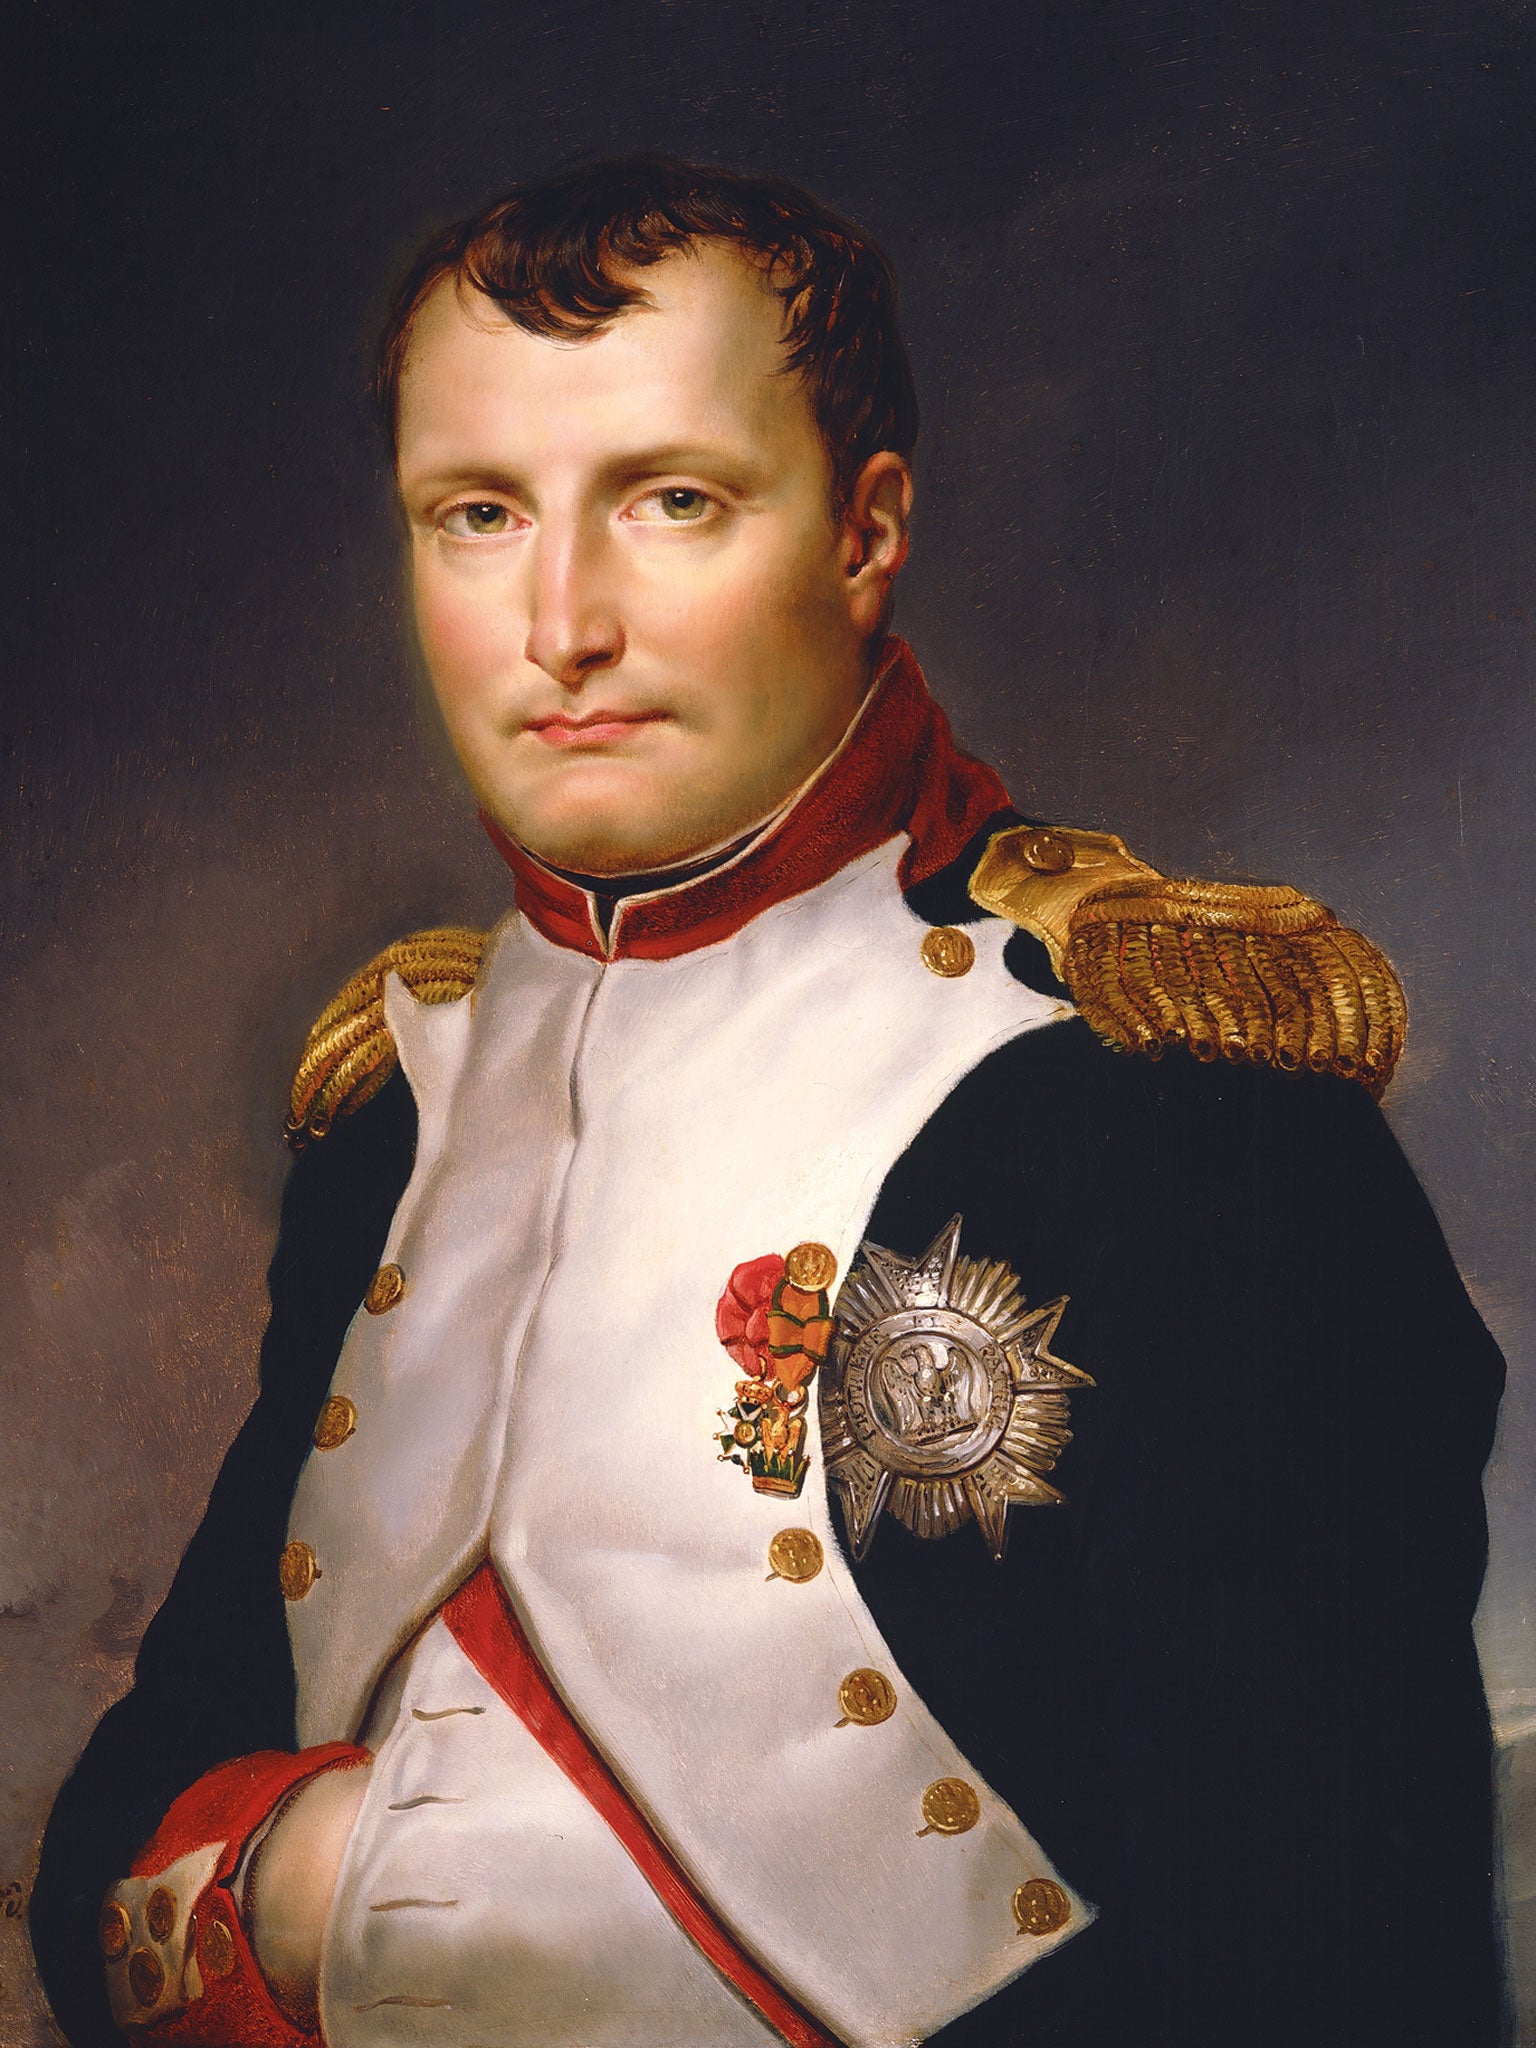 The work, by Jacques-Louis David, shows Napoleon in his National Guard uniform